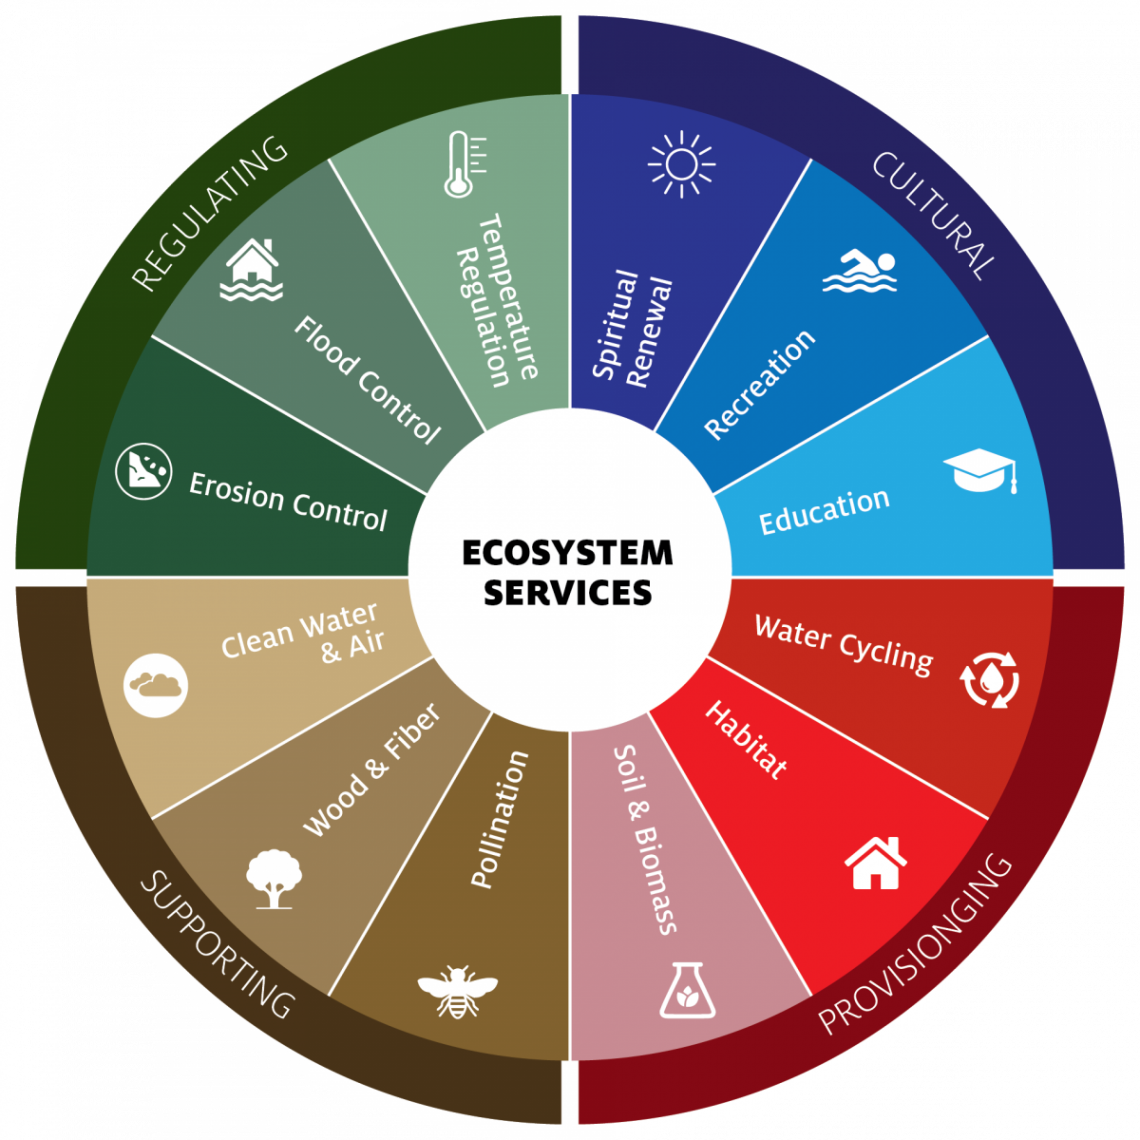 Illustration of the ecosystem services classification